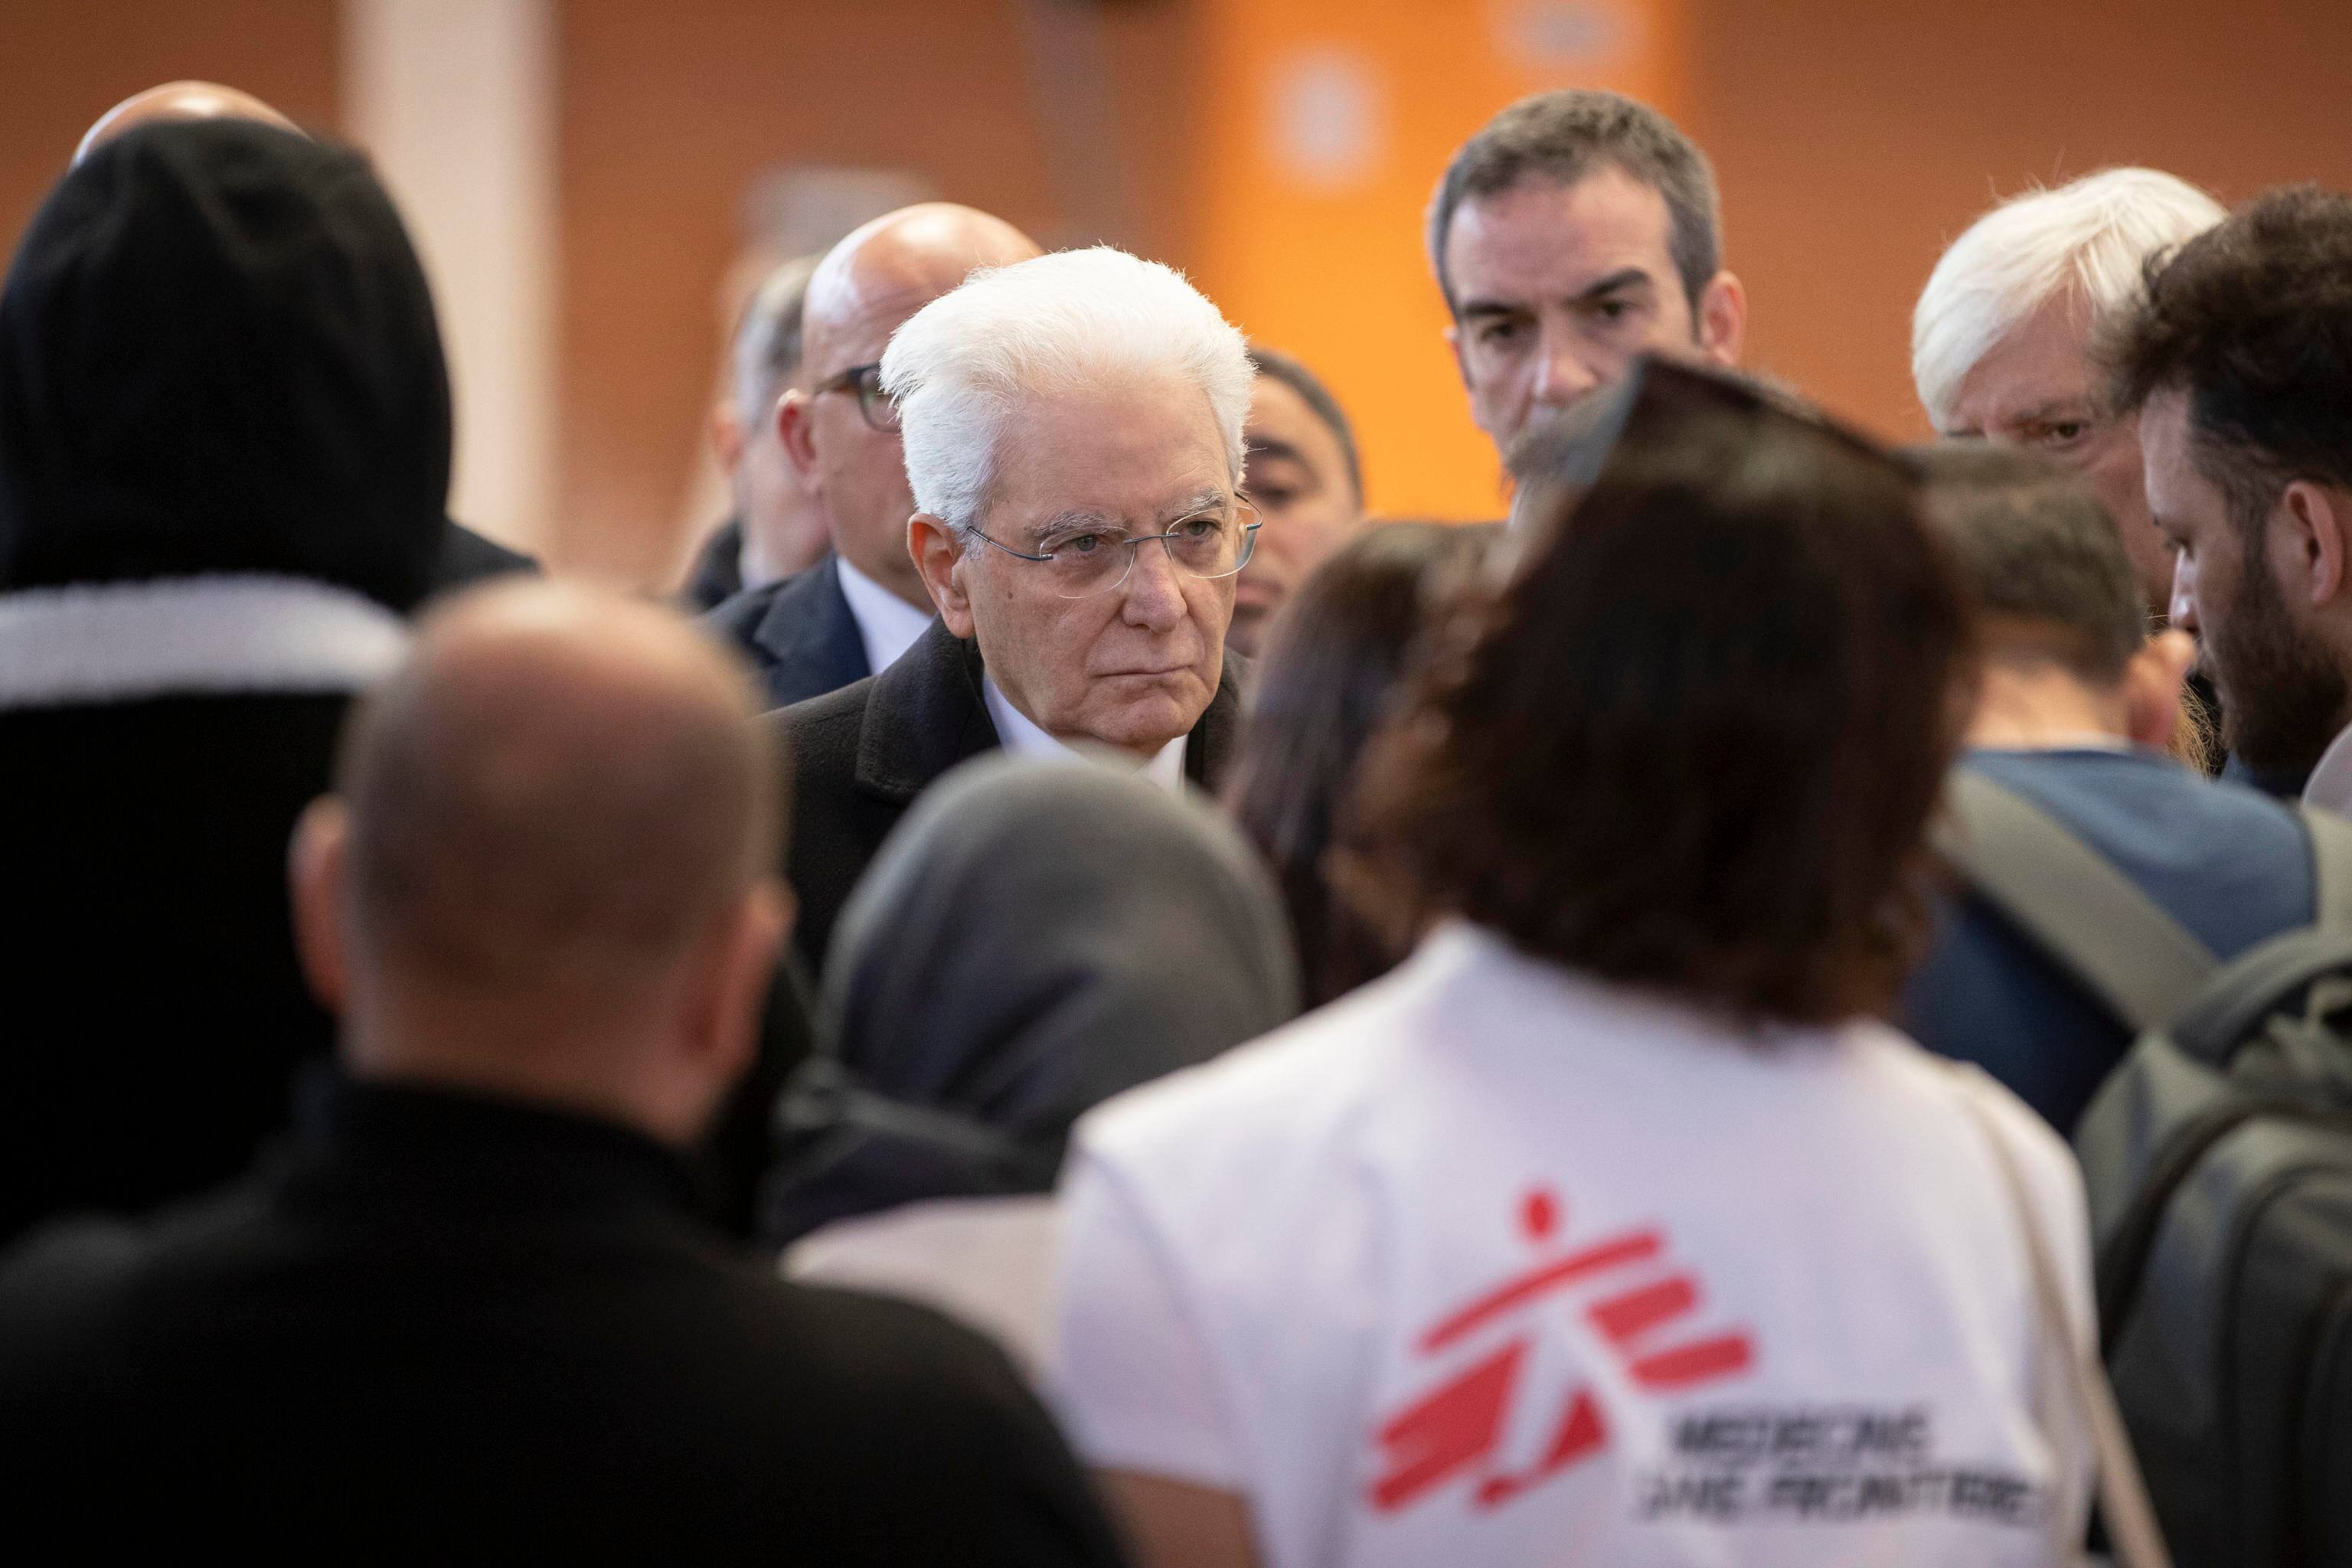 The handout picture provided by the Quirinal Press Office shows Italian President Sergio Mattarella during his visit in Crotone to pay homage to the victims who died in a migrant shipwreck,  in Crotone, Italy, 02 March 2023. At least 67 migrants died after their overloaded boat sank early on 26 February 2023 in stormy seas off Italy's southern Calabria region.
ANSA/ QUIRINAL PRESS OFFICE/ FRANCESCO AMMENDOLA  +++ ANSA PROVIDES ACCESS TO THIS HANDOUT PHOTO TO BE USED SOLELY TO ILLUSTRATE NEWS REPORTING OR COMMENTARY ON THE FACTS OR EVENTS DEPICTED IN THIS IMAGE; NO ARCHIVING; NO LICENSING +++ NPK +++